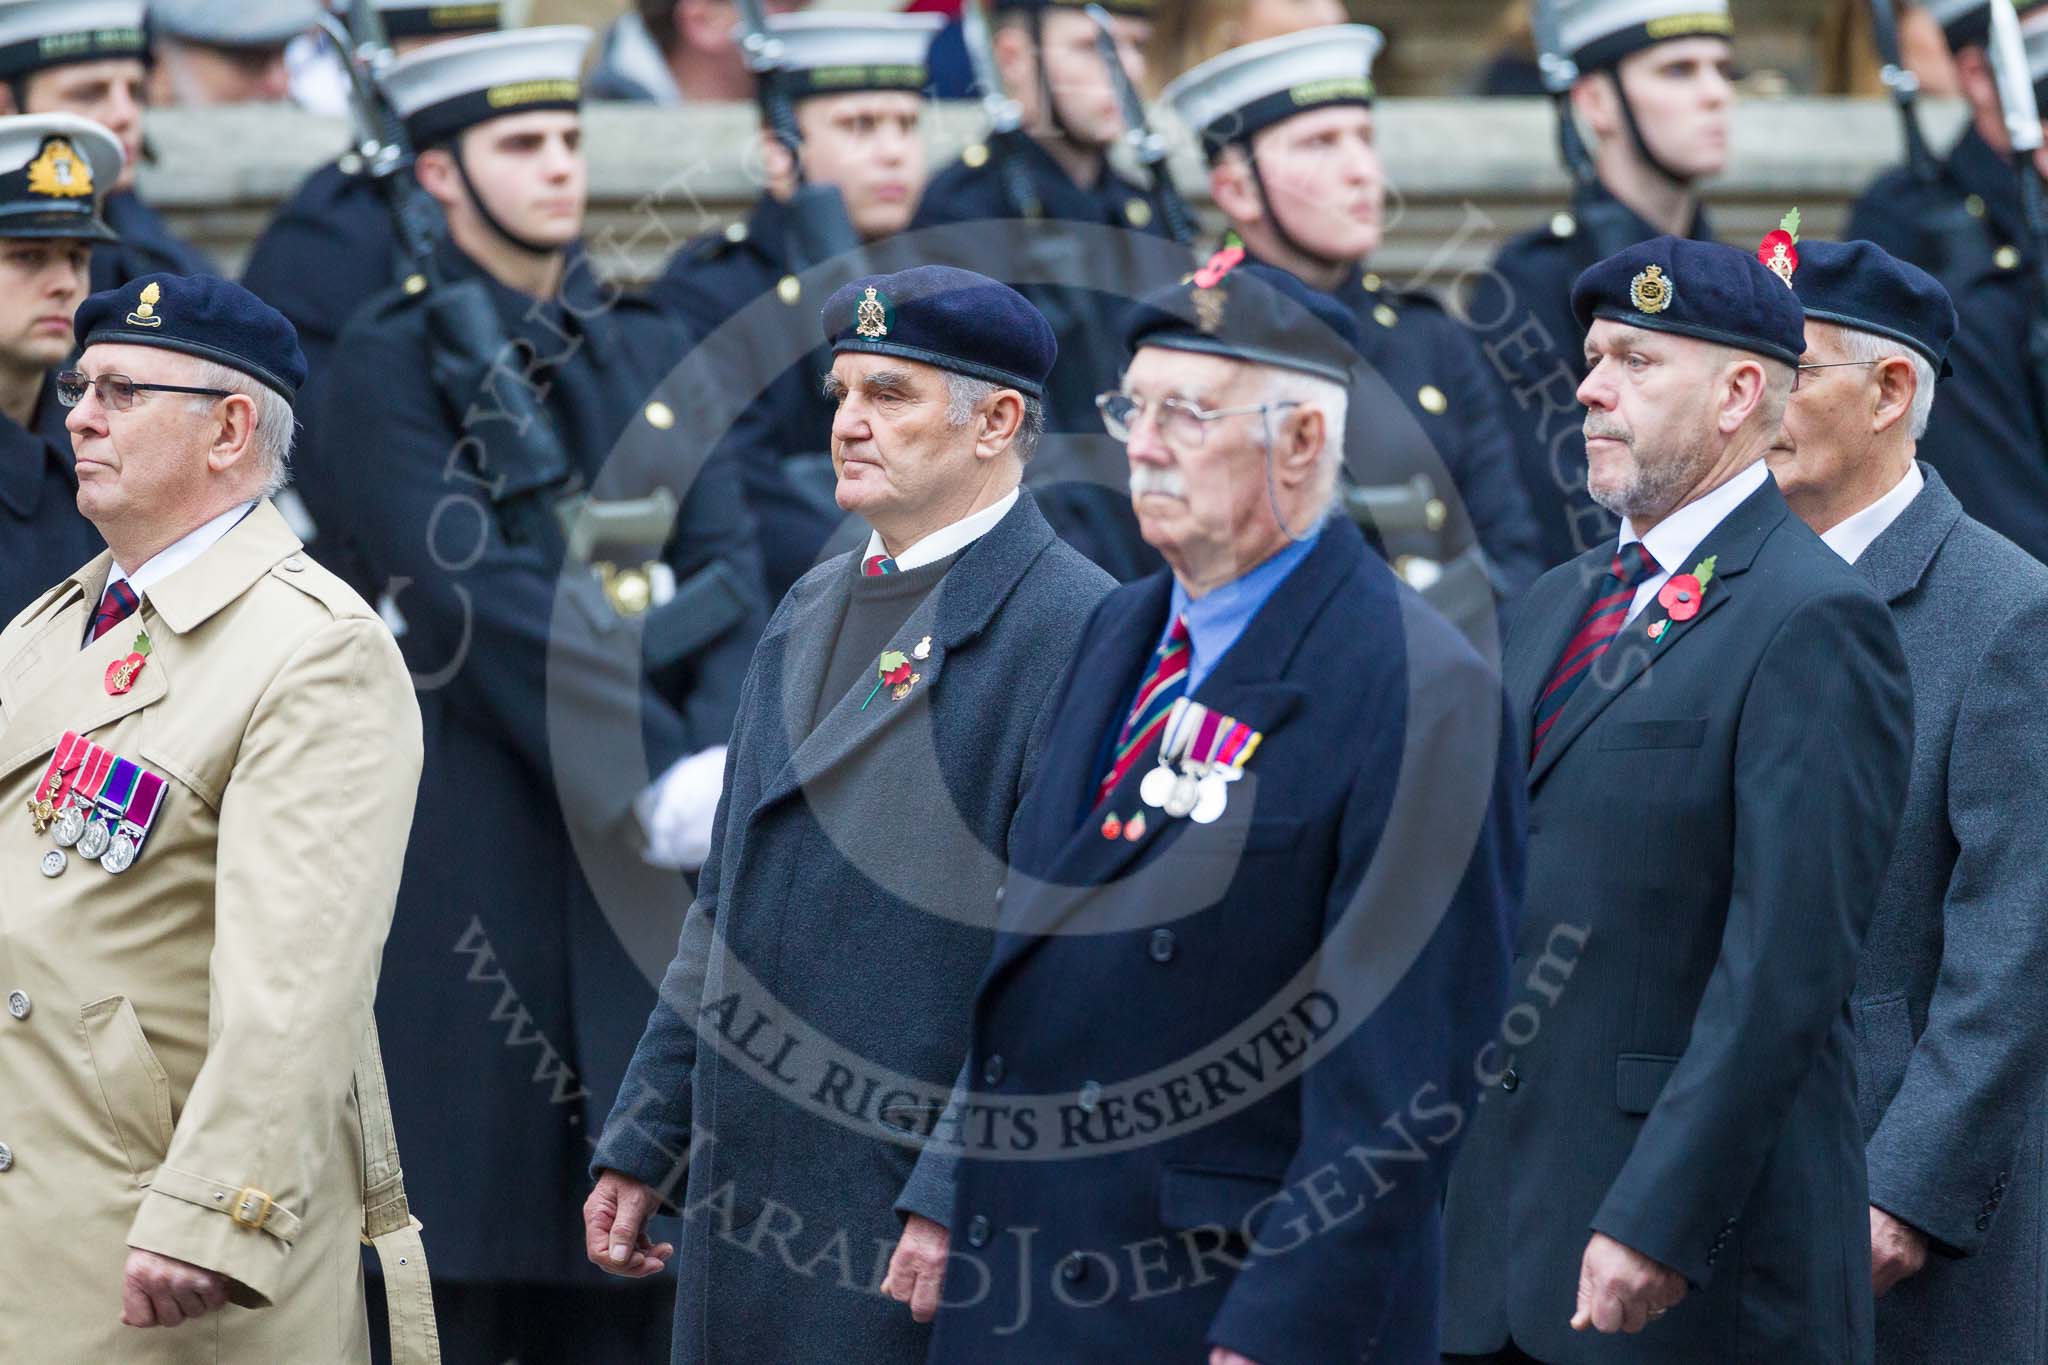 Remembrance Sunday at the Cenotaph 2015: Group B31, Beachley Old Boys Association.
Cenotaph, Whitehall, London SW1,
London,
Greater London,
United Kingdom,
on 08 November 2015 at 11:42, image #239